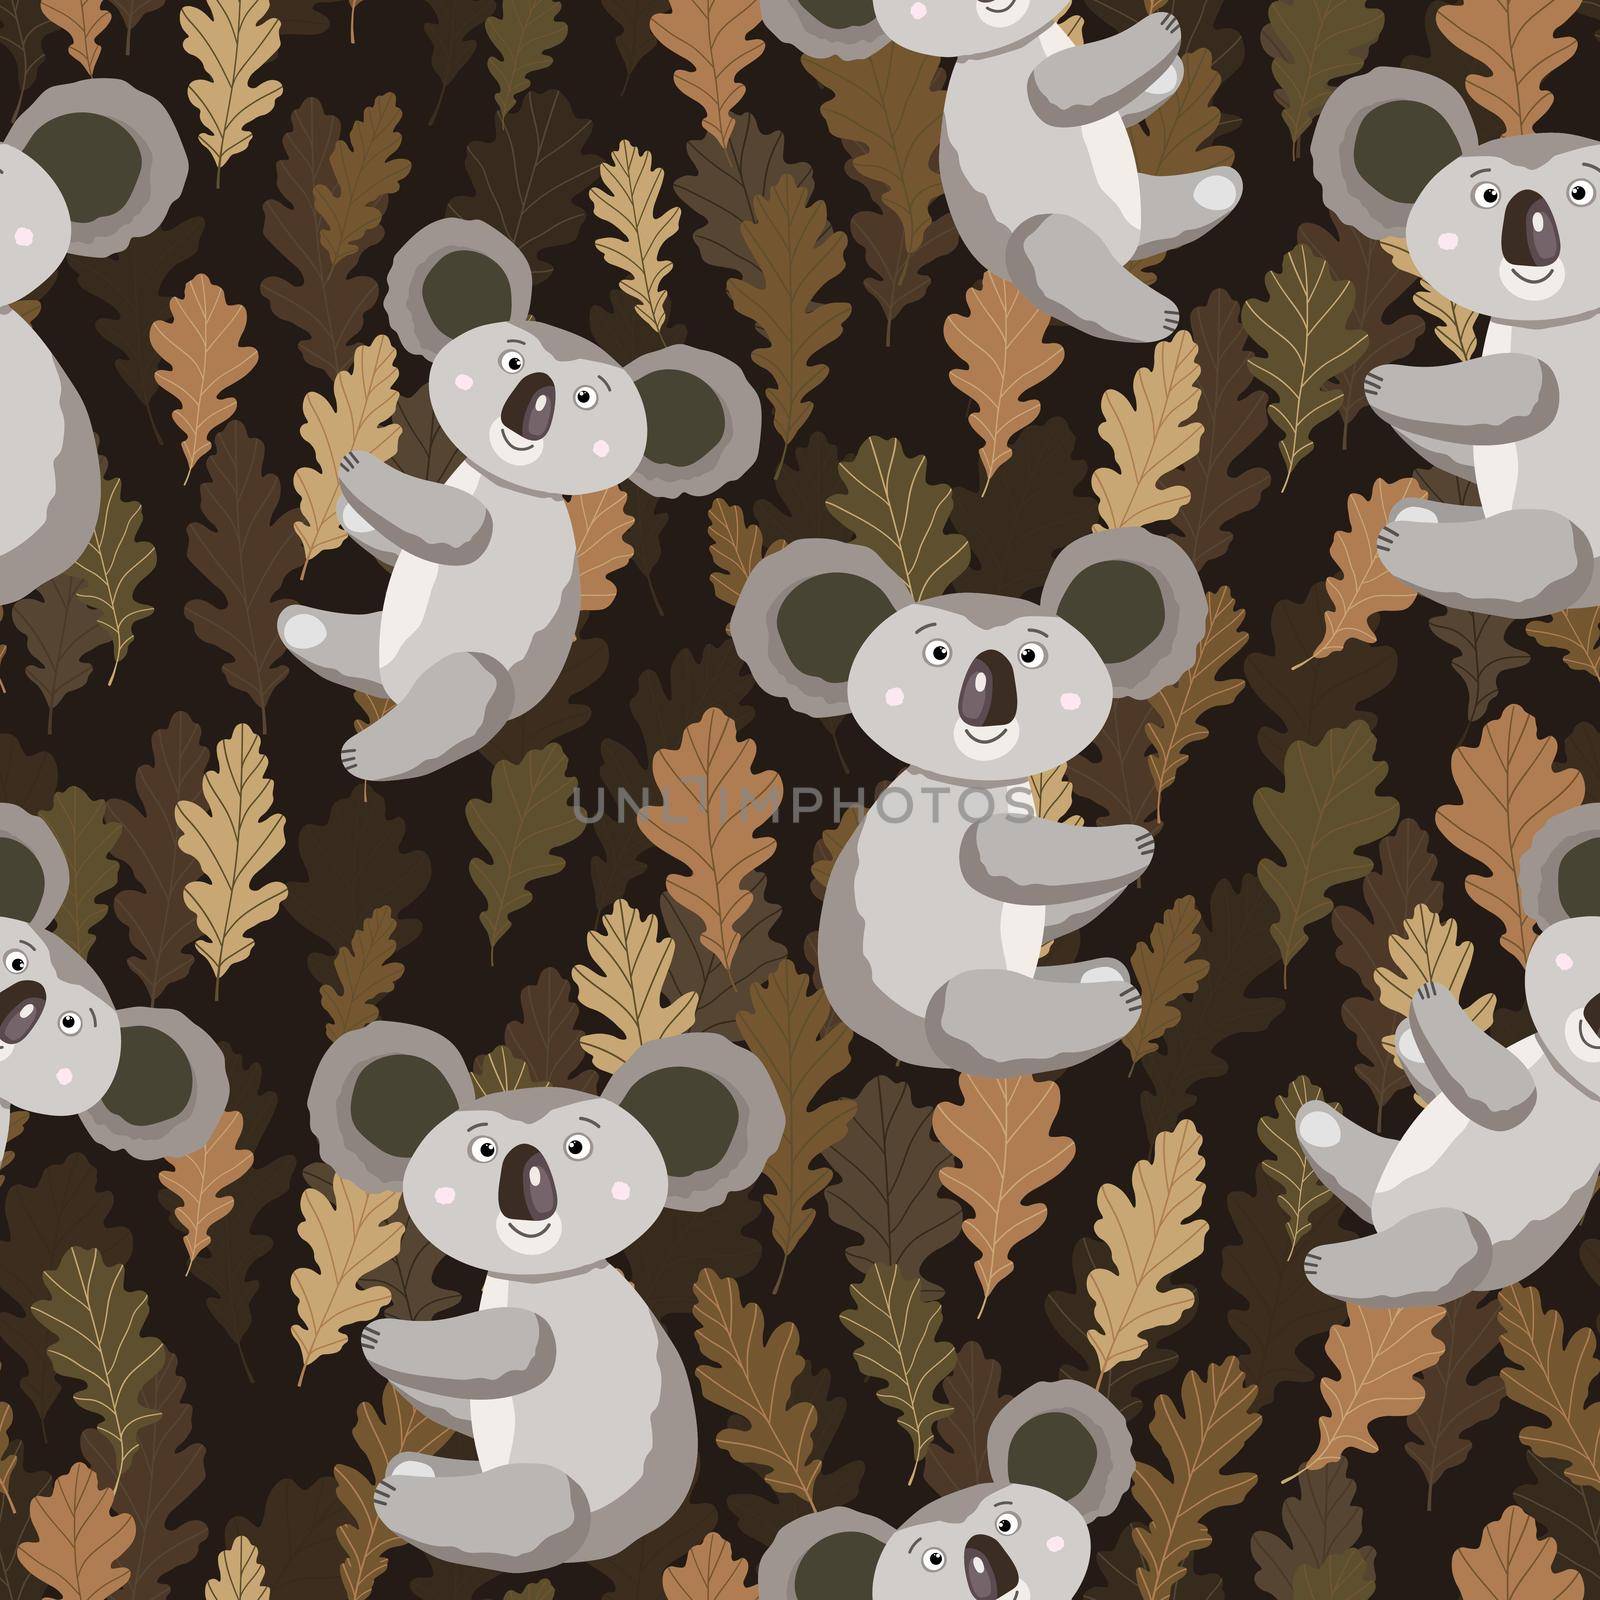 Seamless pattern with cute koala baby and leaves on color background. Funny australian animals. Card, postcards for kids. Flat vector illustration for fabric, textile, wallpaper, poster, paper